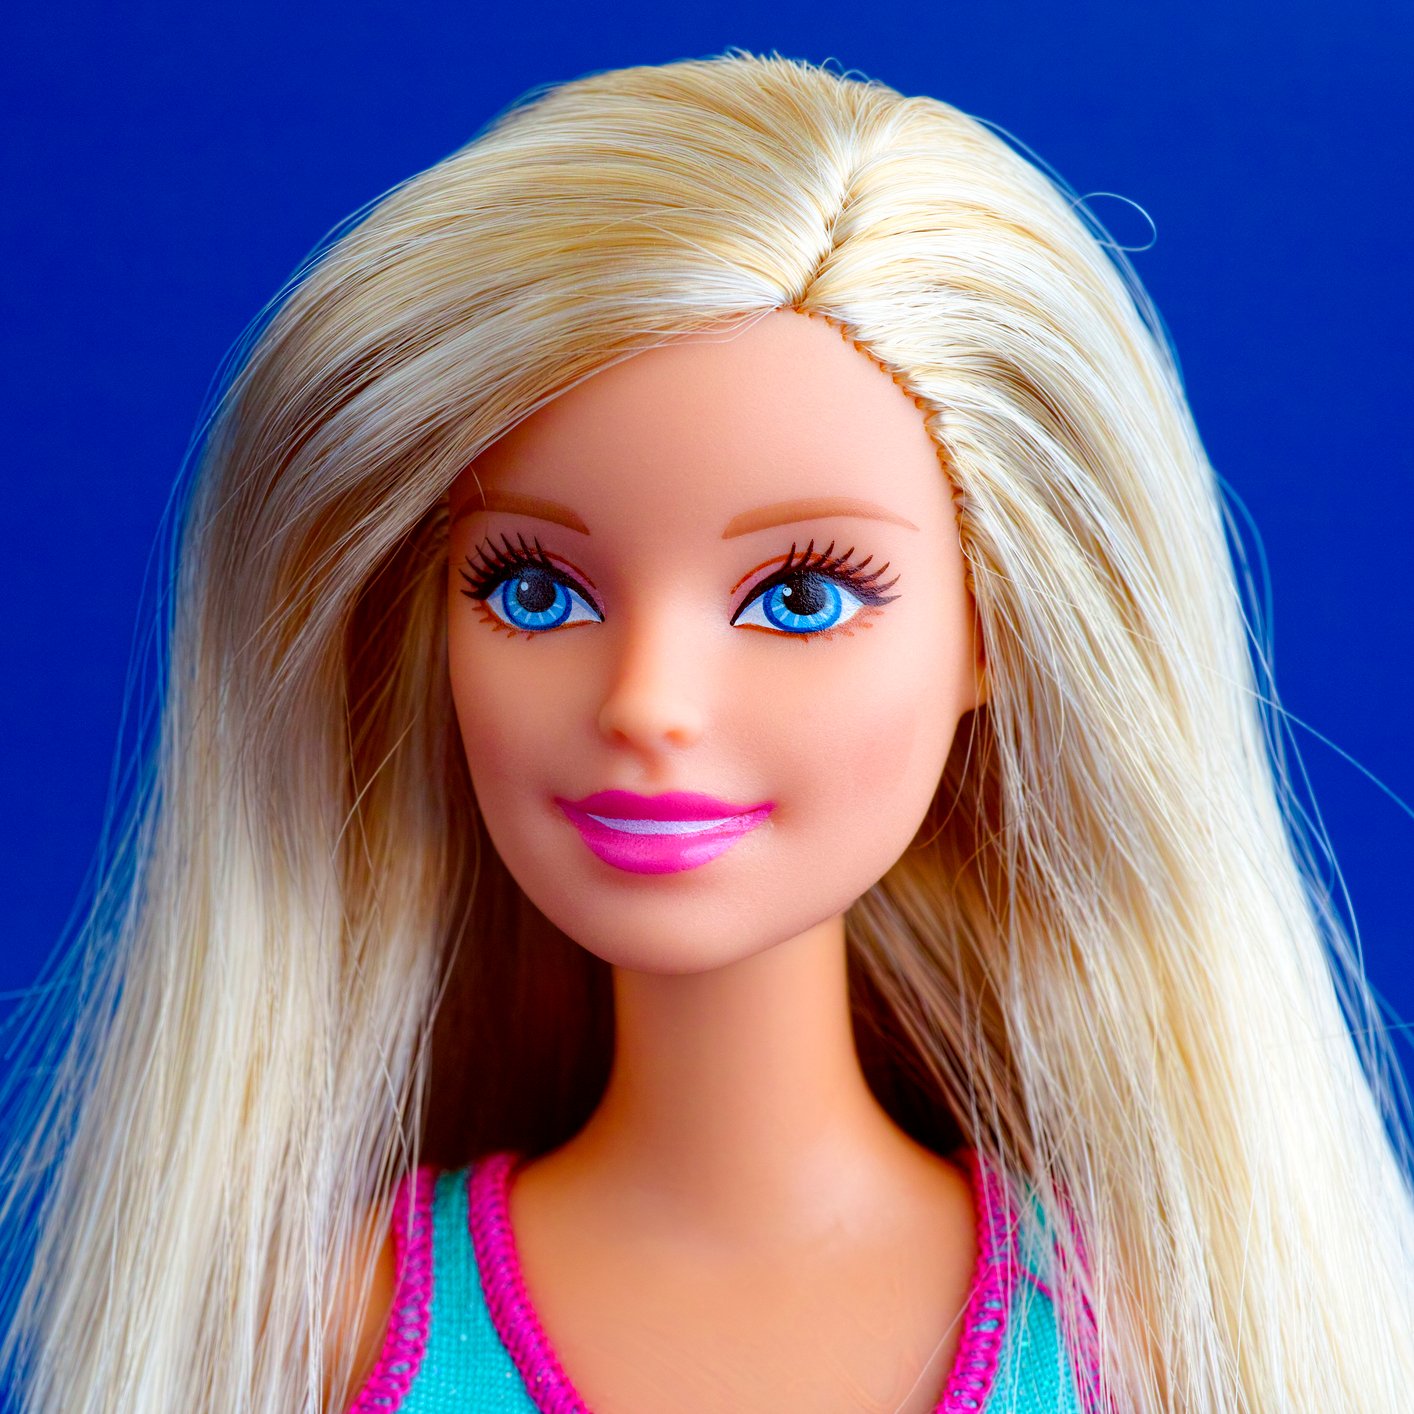 24/7 Wall St. » Blog Archive » Most Popular Barbie Dolls of All Time